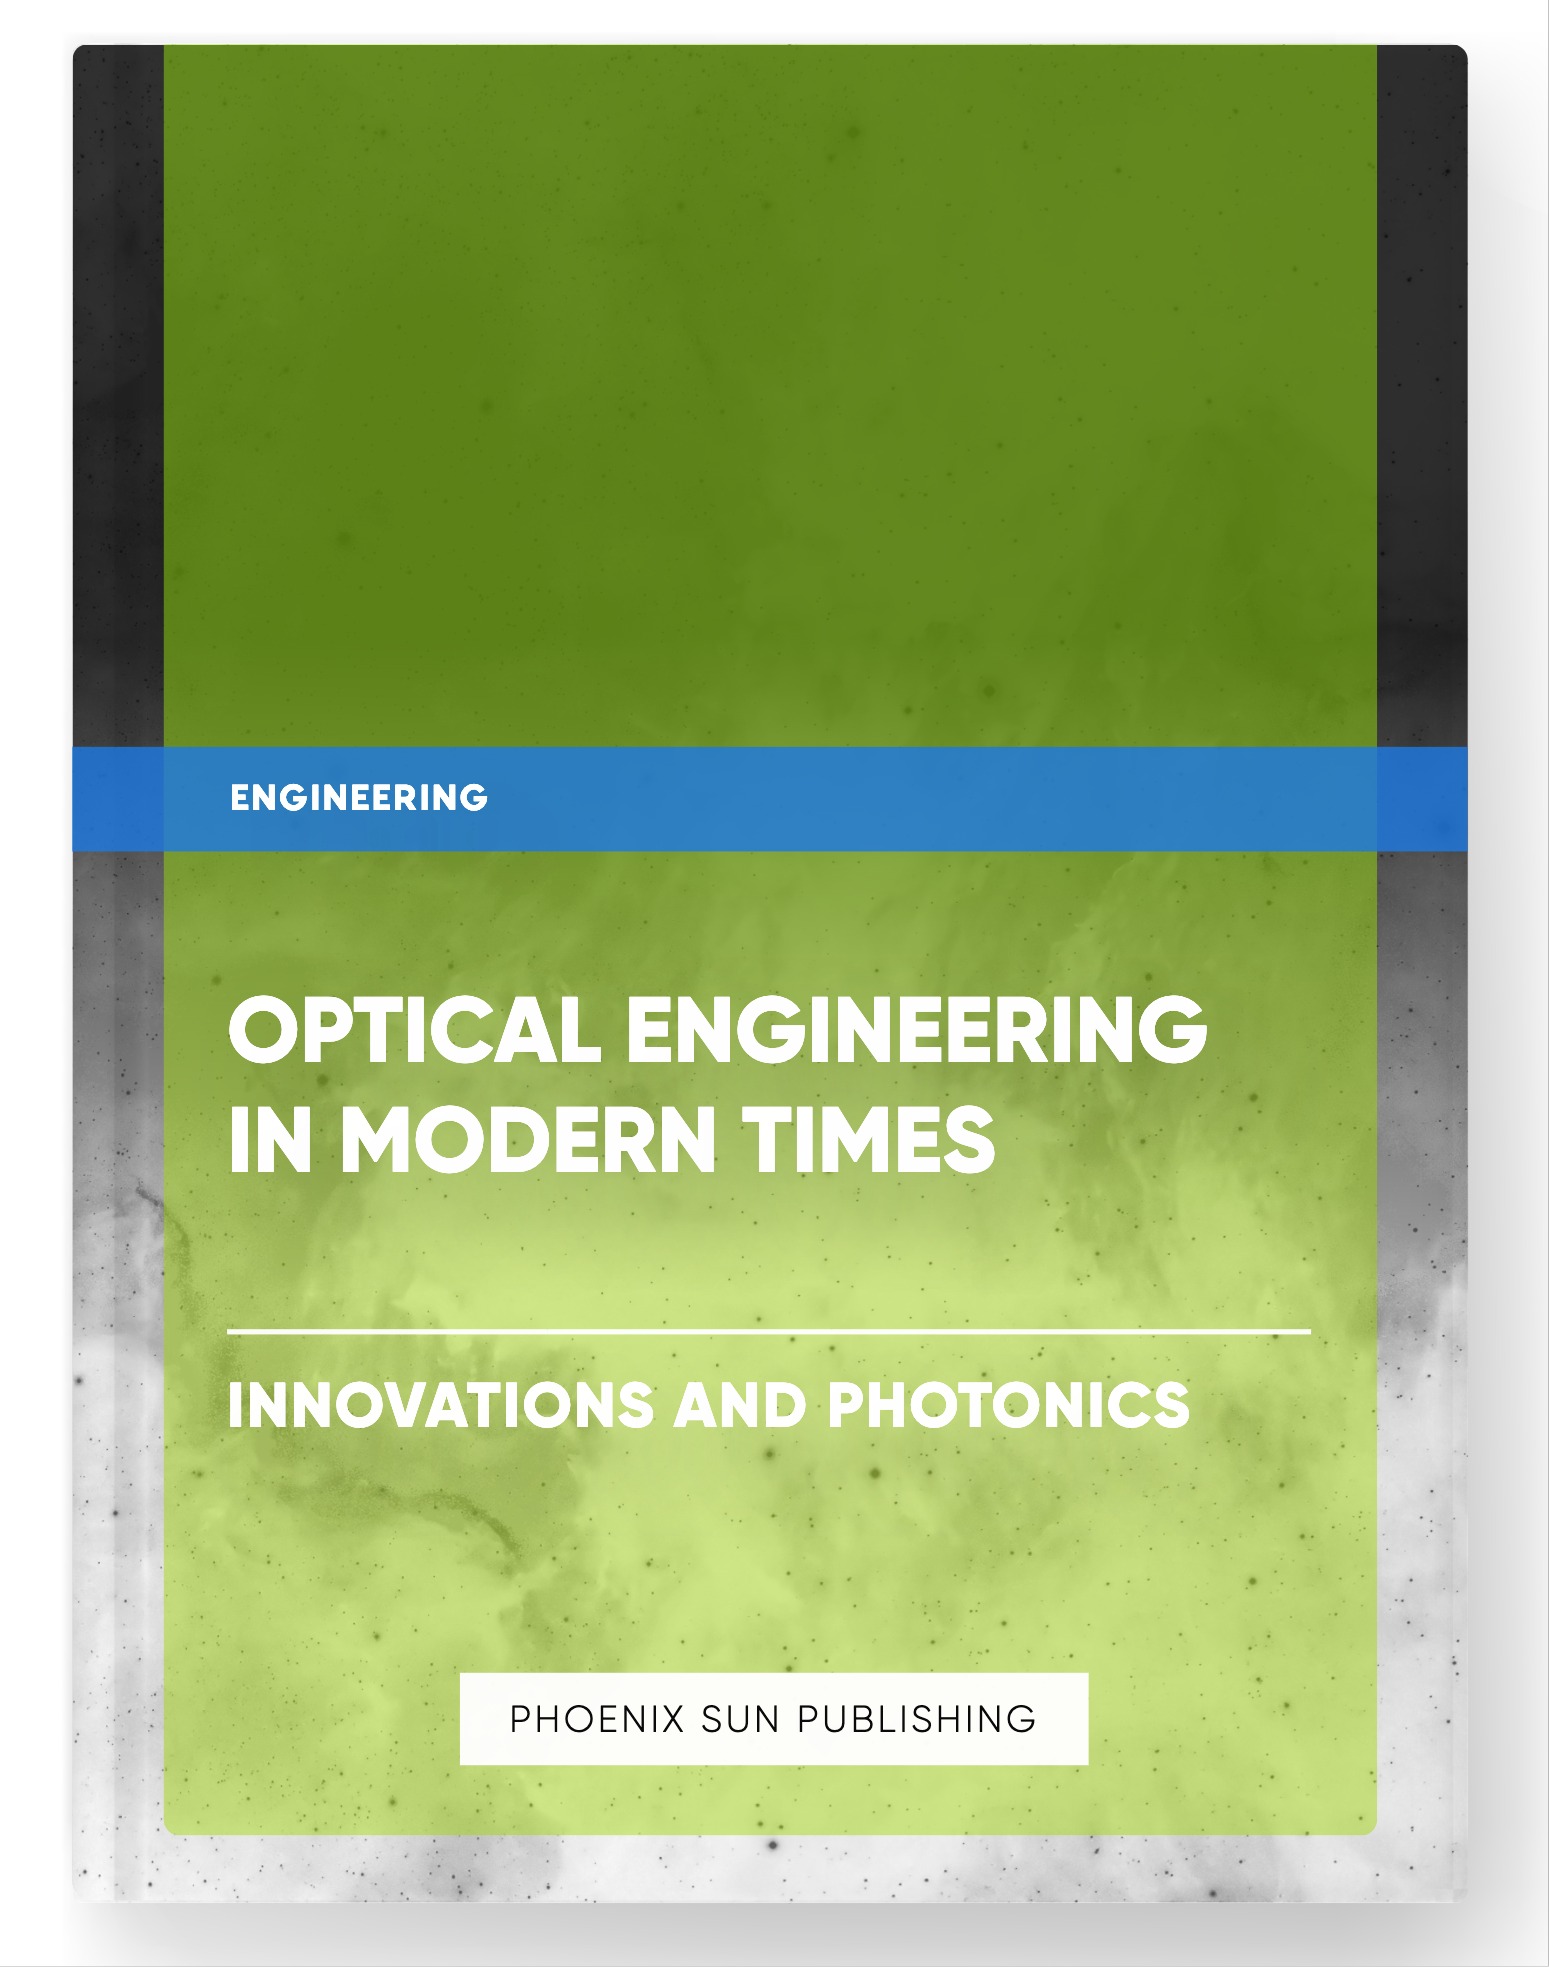 Optical Engineering in Modern Times – Innovations and Photonics